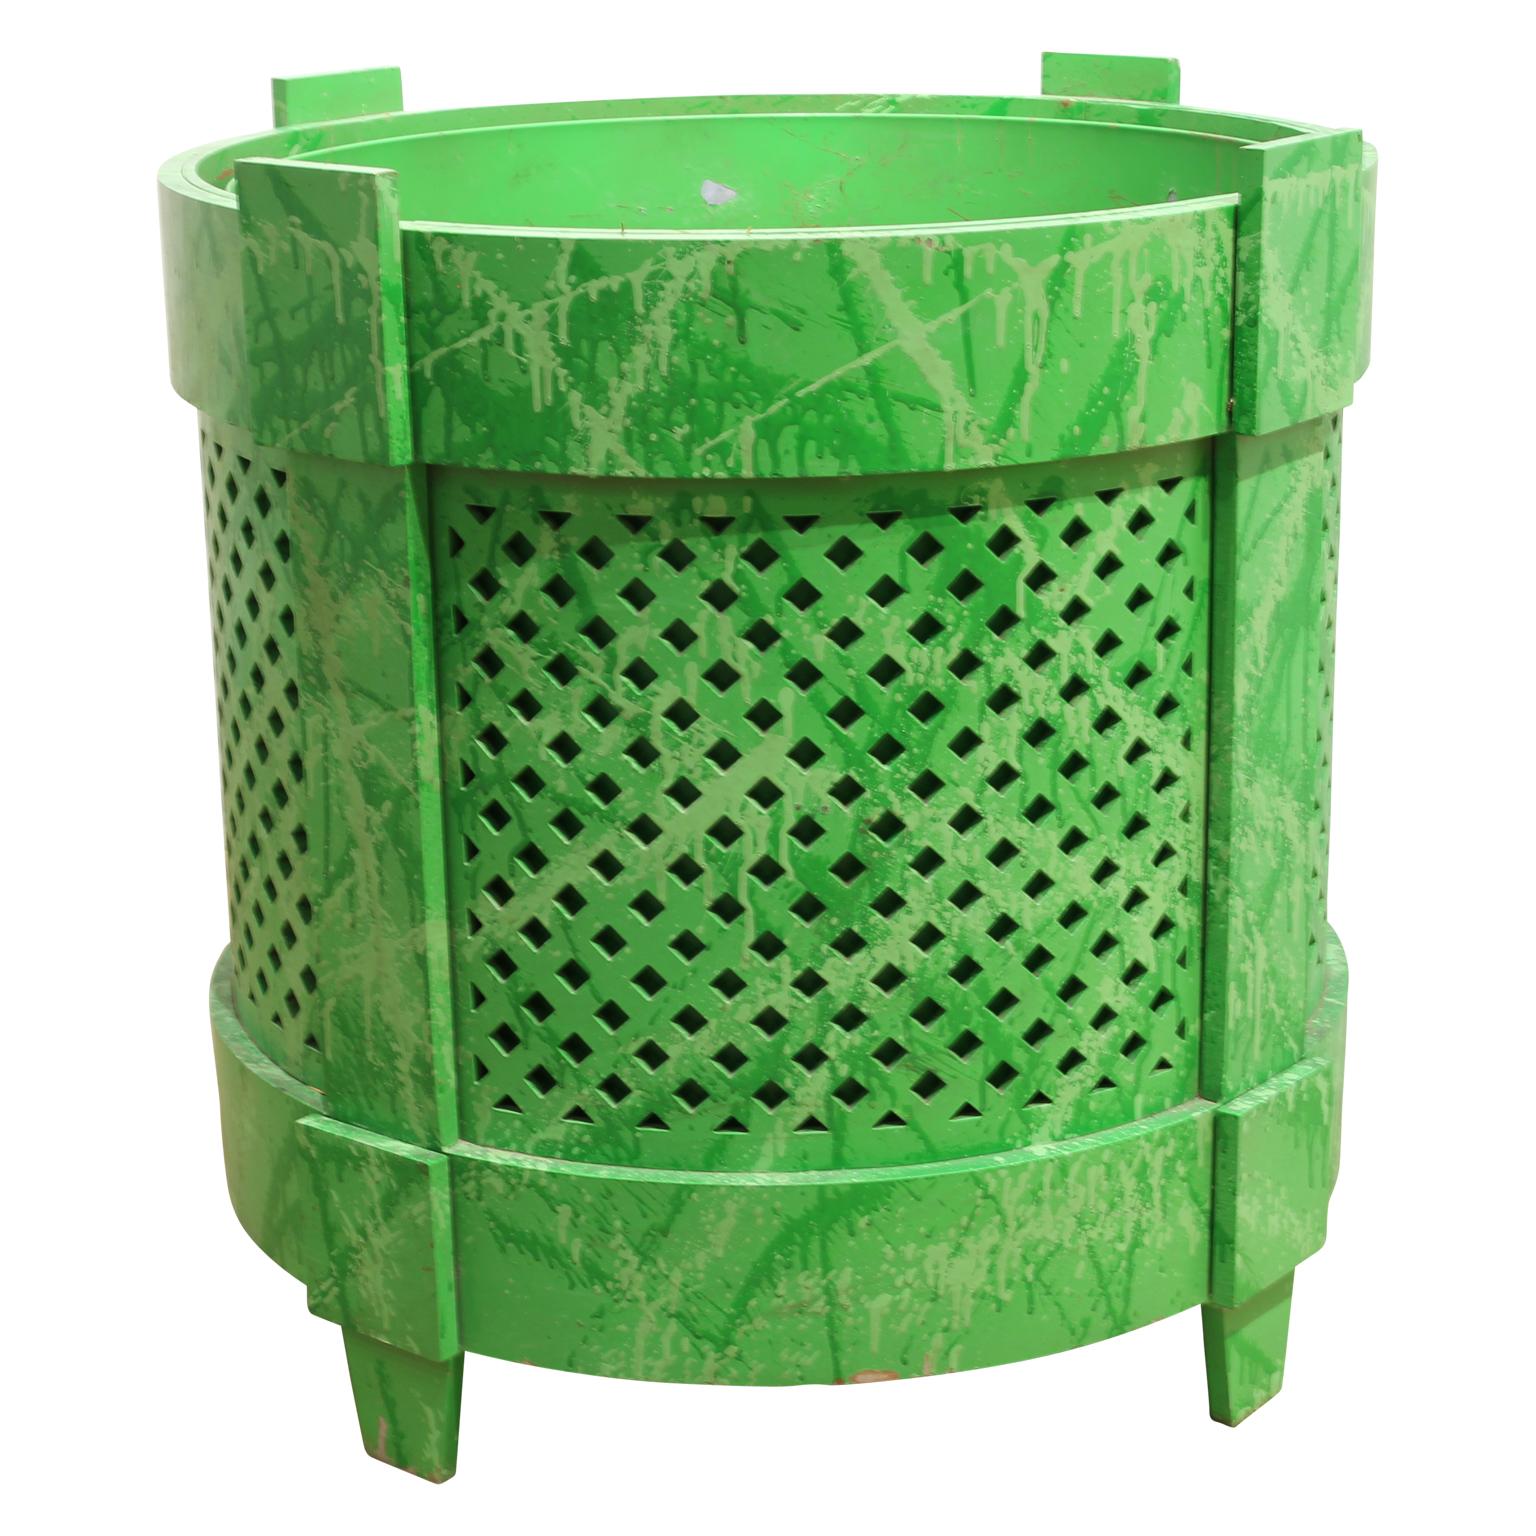 Custom green Kelly Gale Amen planters that are perfect for indoor or outdoor plants. The planter was shaped using a water jet-cut and the finished with light and darker tones of green splatters. The side are grated for a functional and decorative